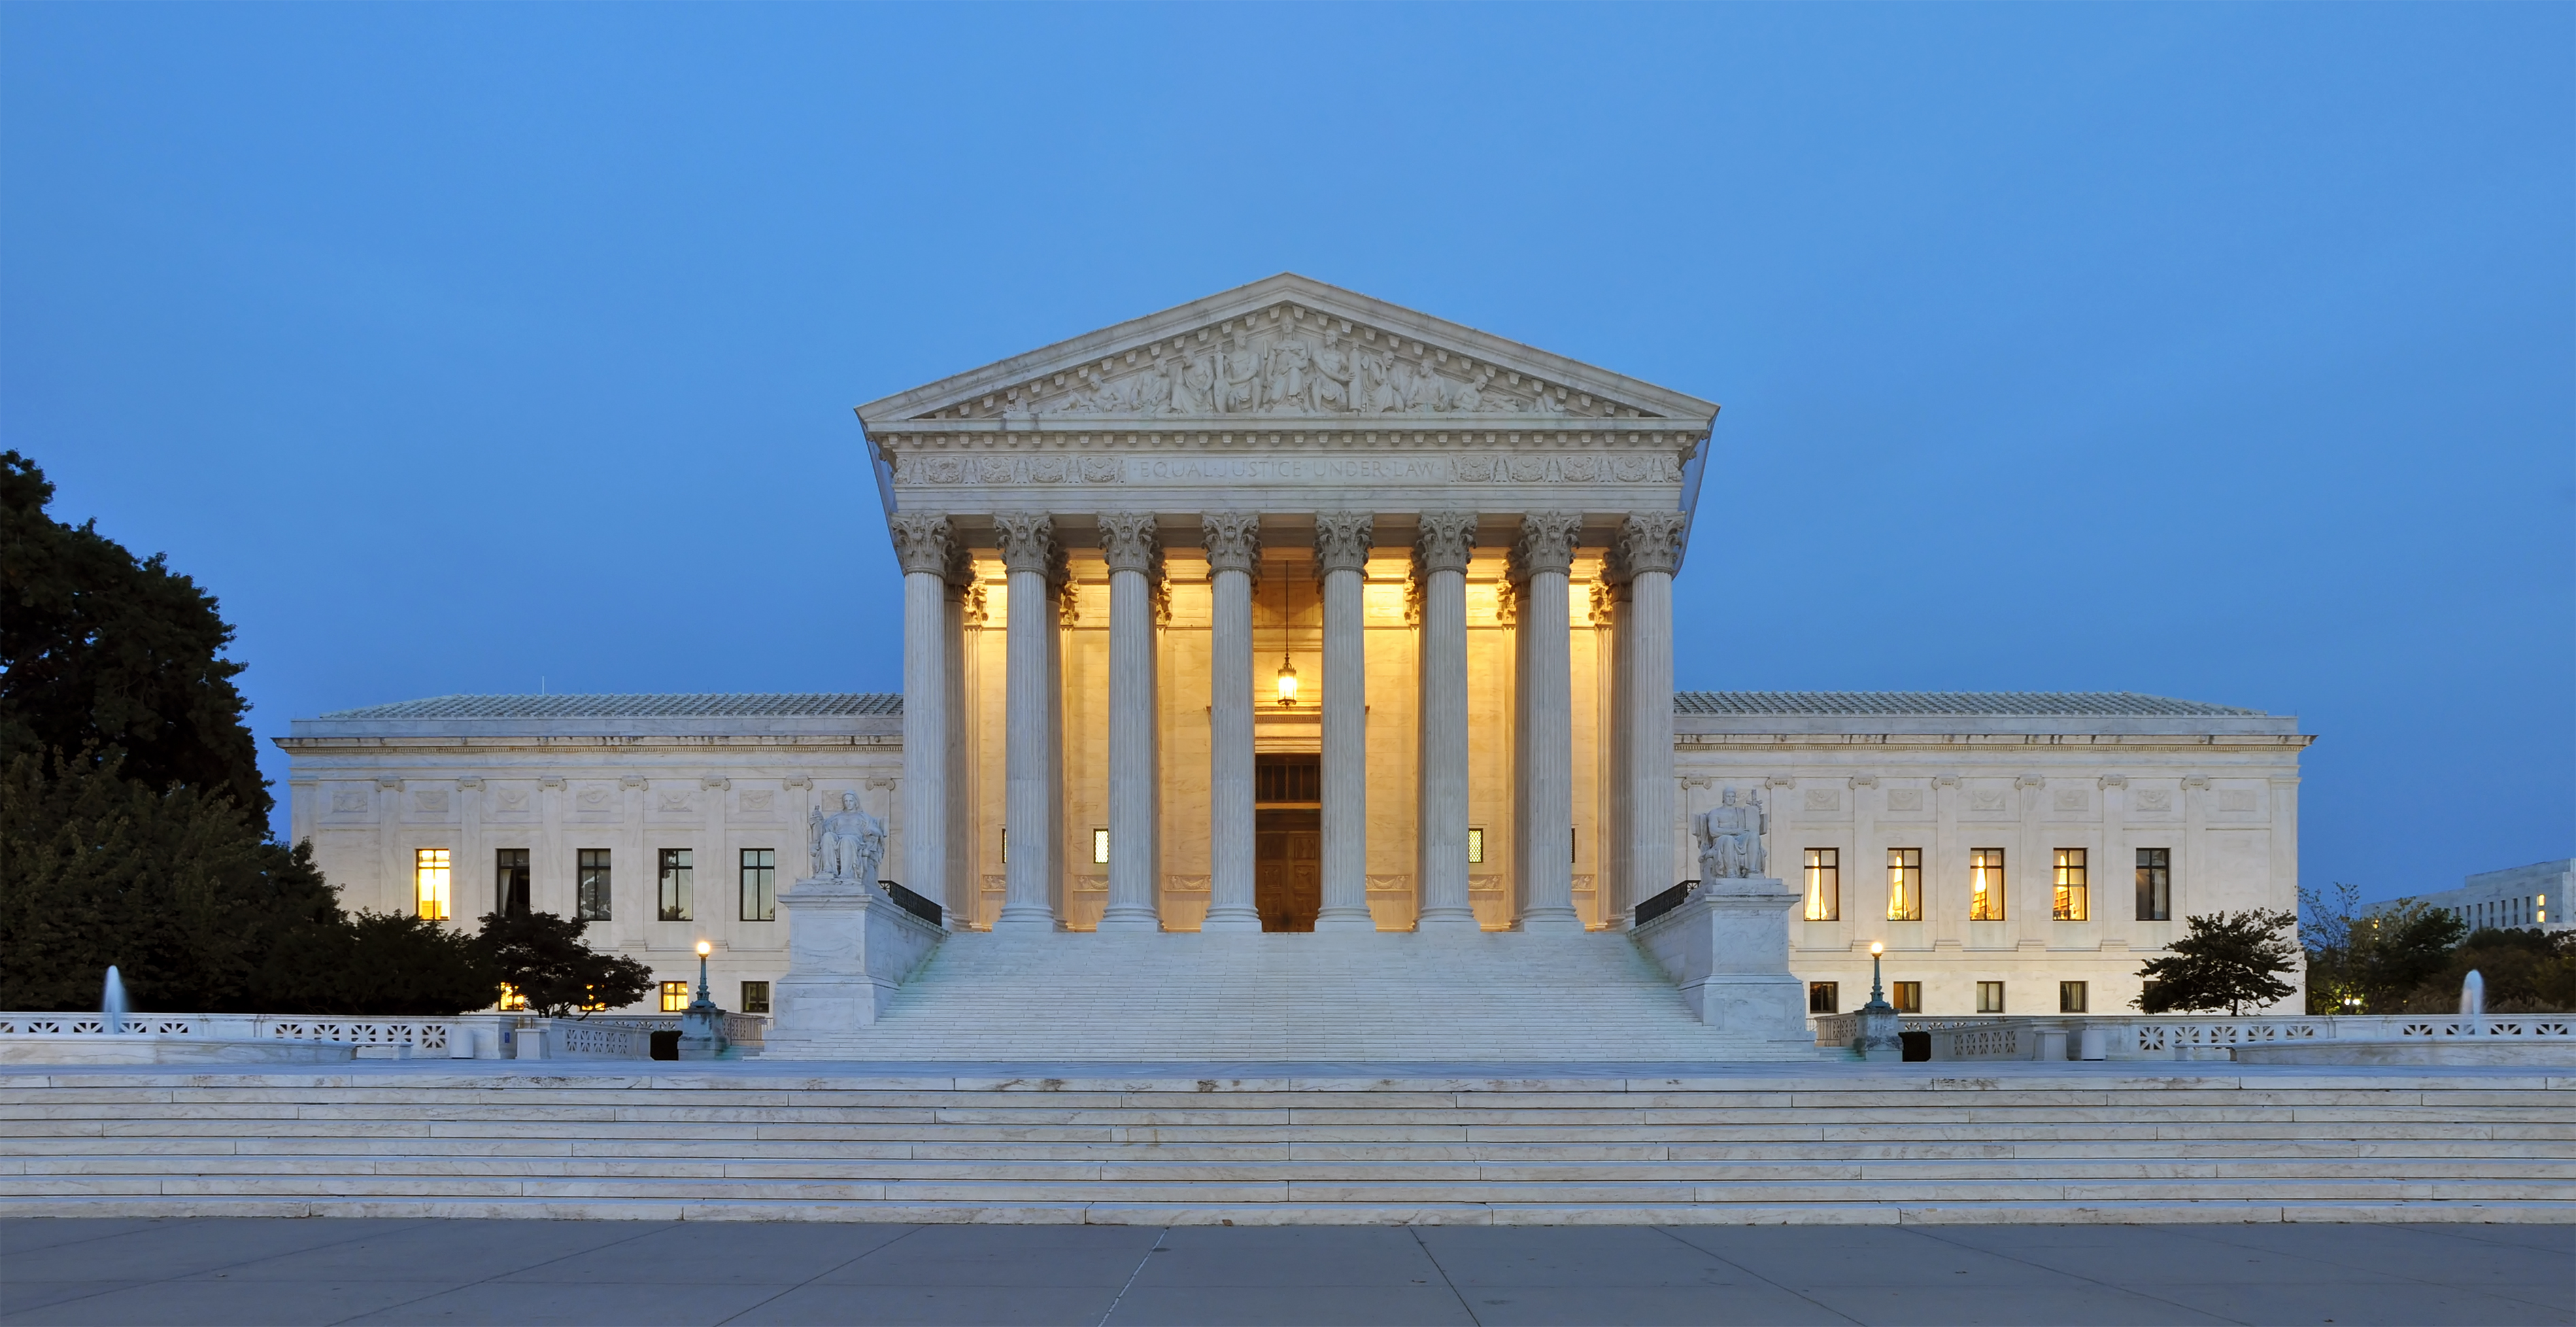 An image of the front of the U.S. Supreme Court